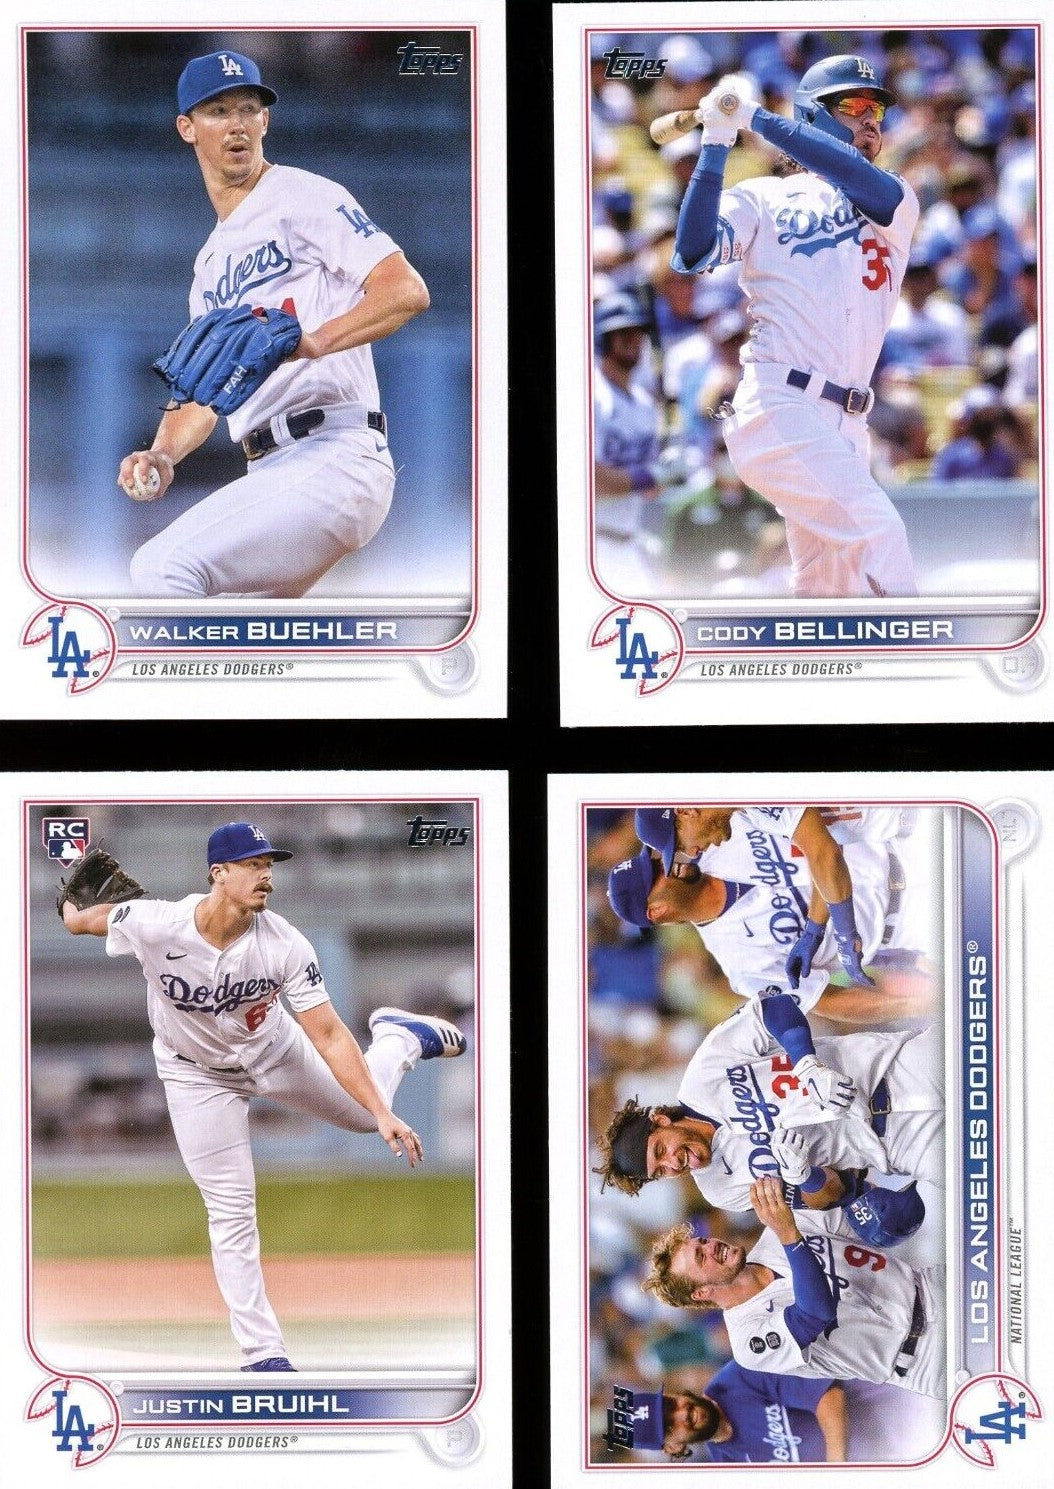  2023 TOPPS GOLD #391 WALKER BUEHLER /2023 LOS ANGELES DODGERS  BASEBALL OFFICIAL TRADING CARD OF MLB : Collectibles & Fine Art